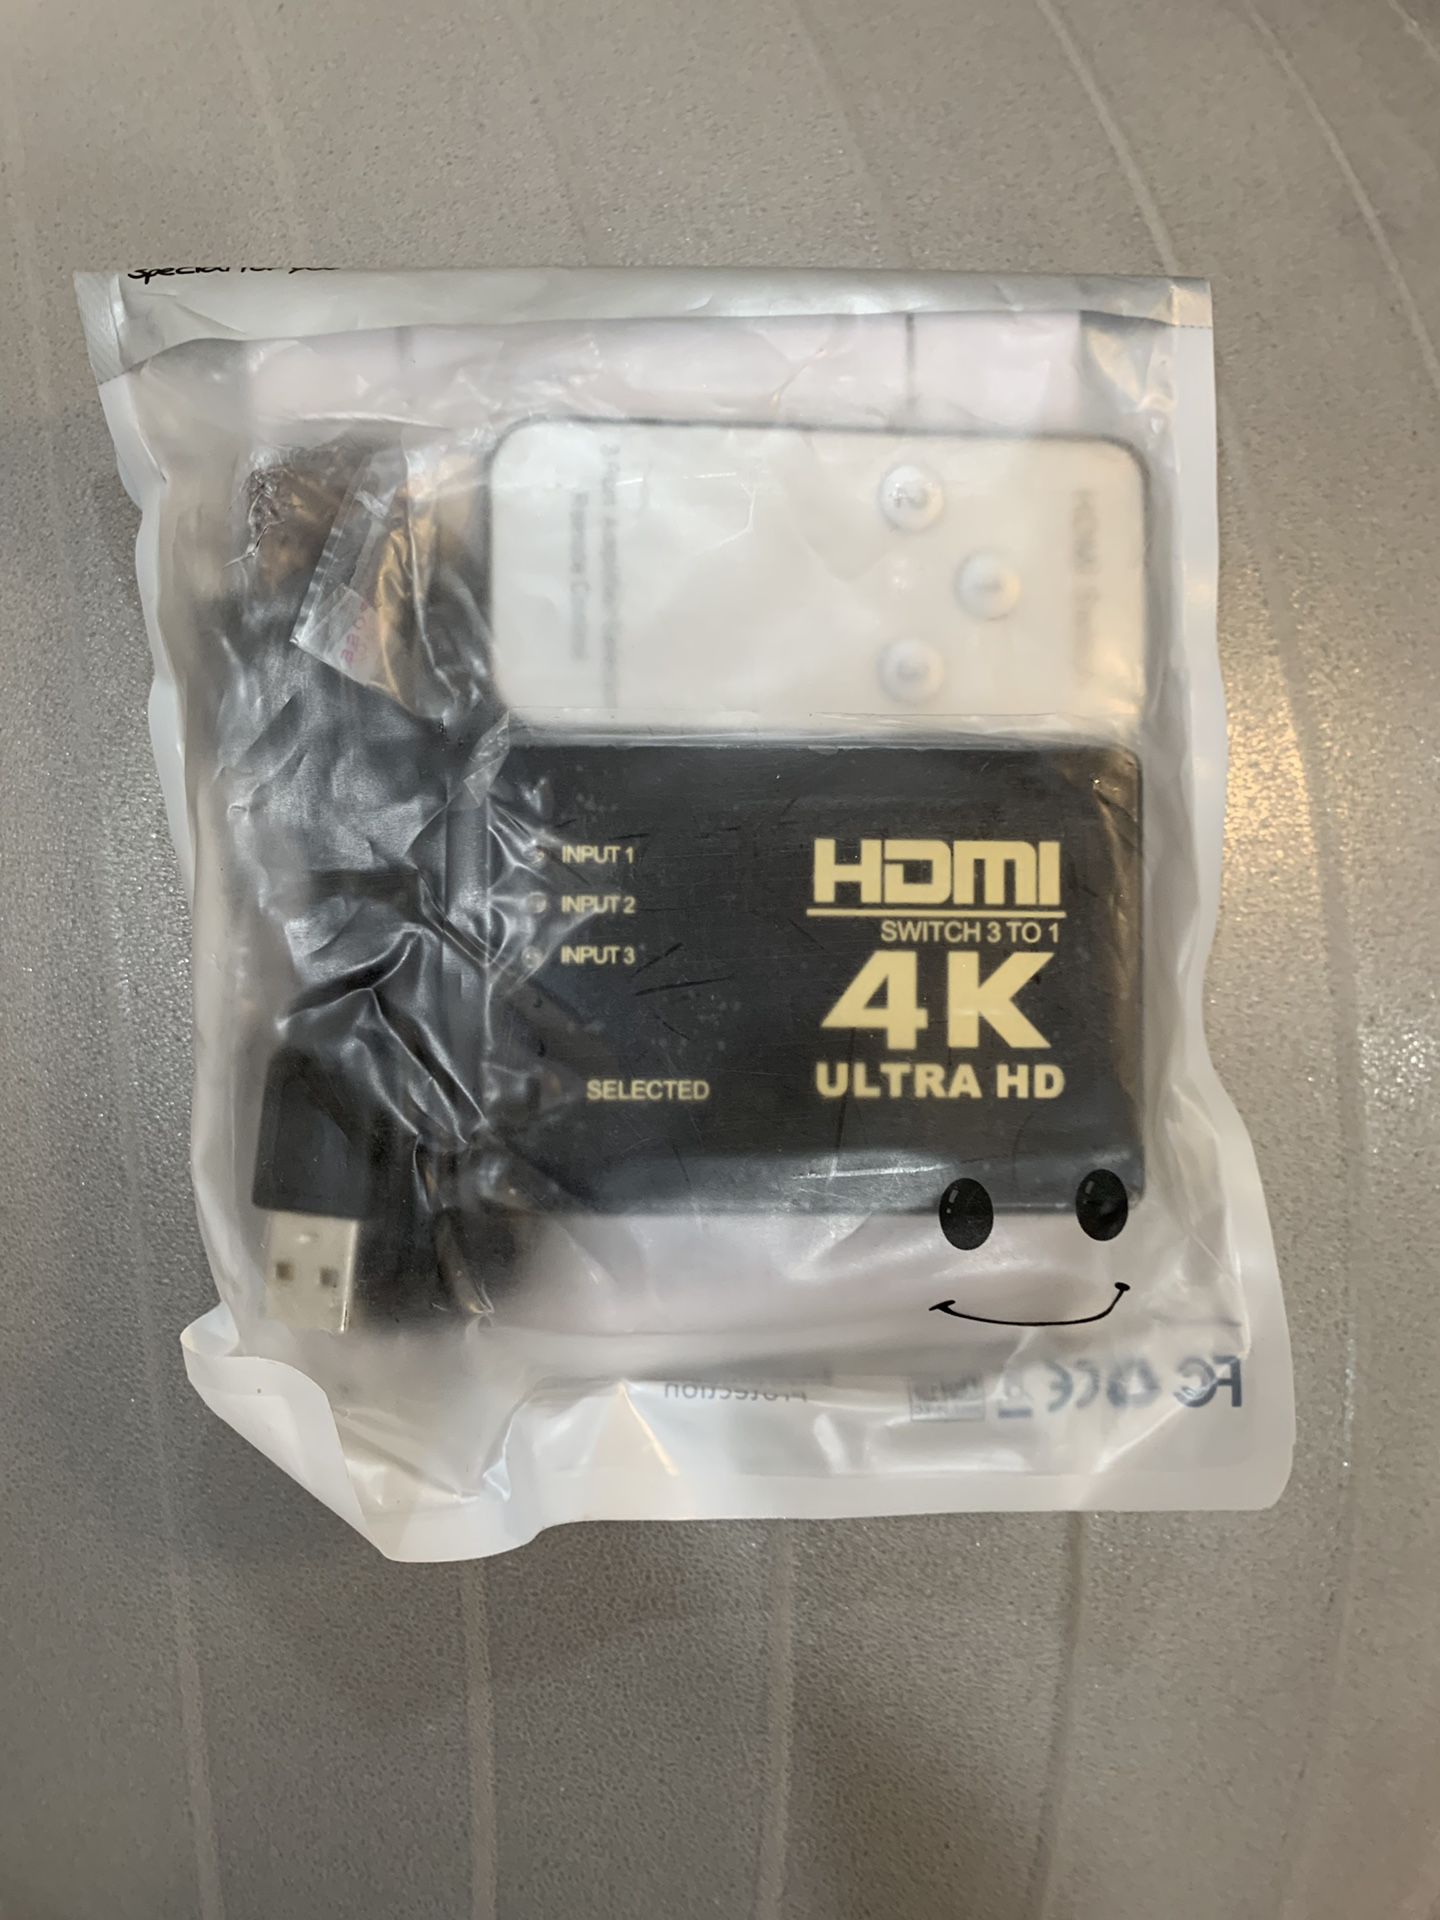 4 K HDMI Switch. With remote. Never used